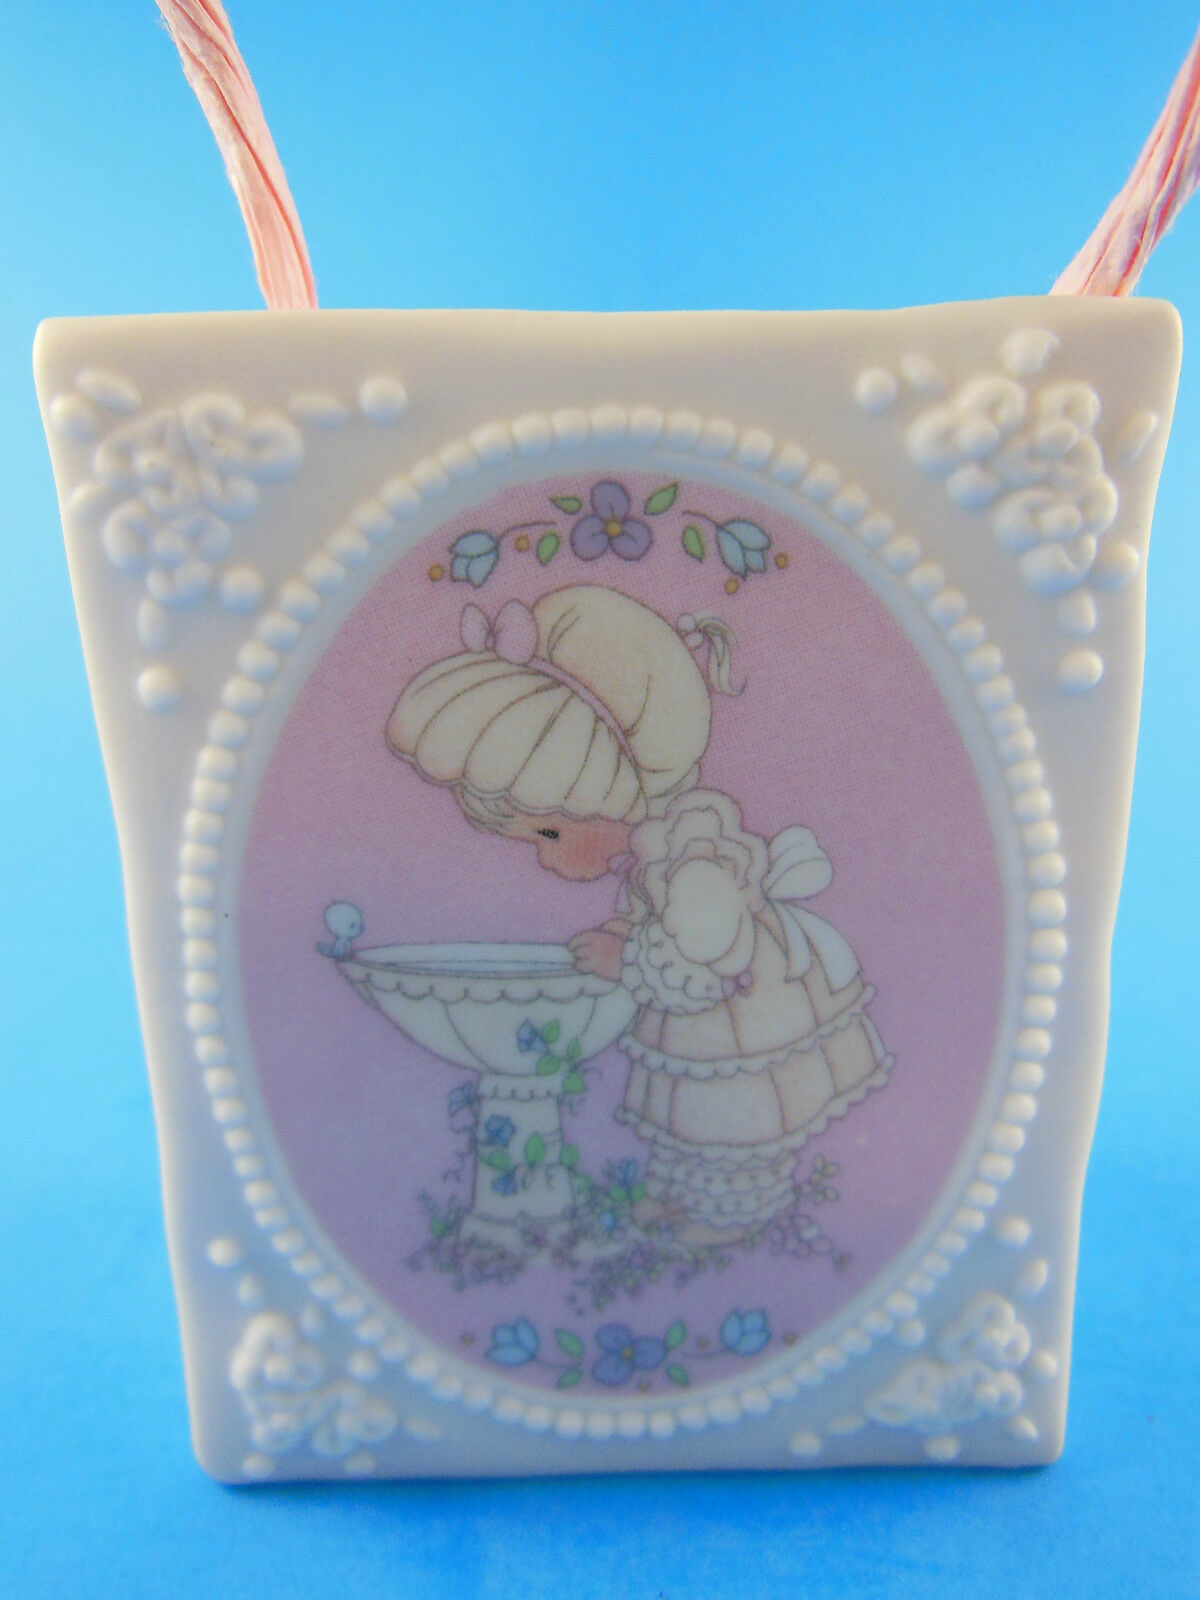 Precious Moments 1993 Porcelain Bag Reflections of His Love 2" x 3" X 1" - $9.89